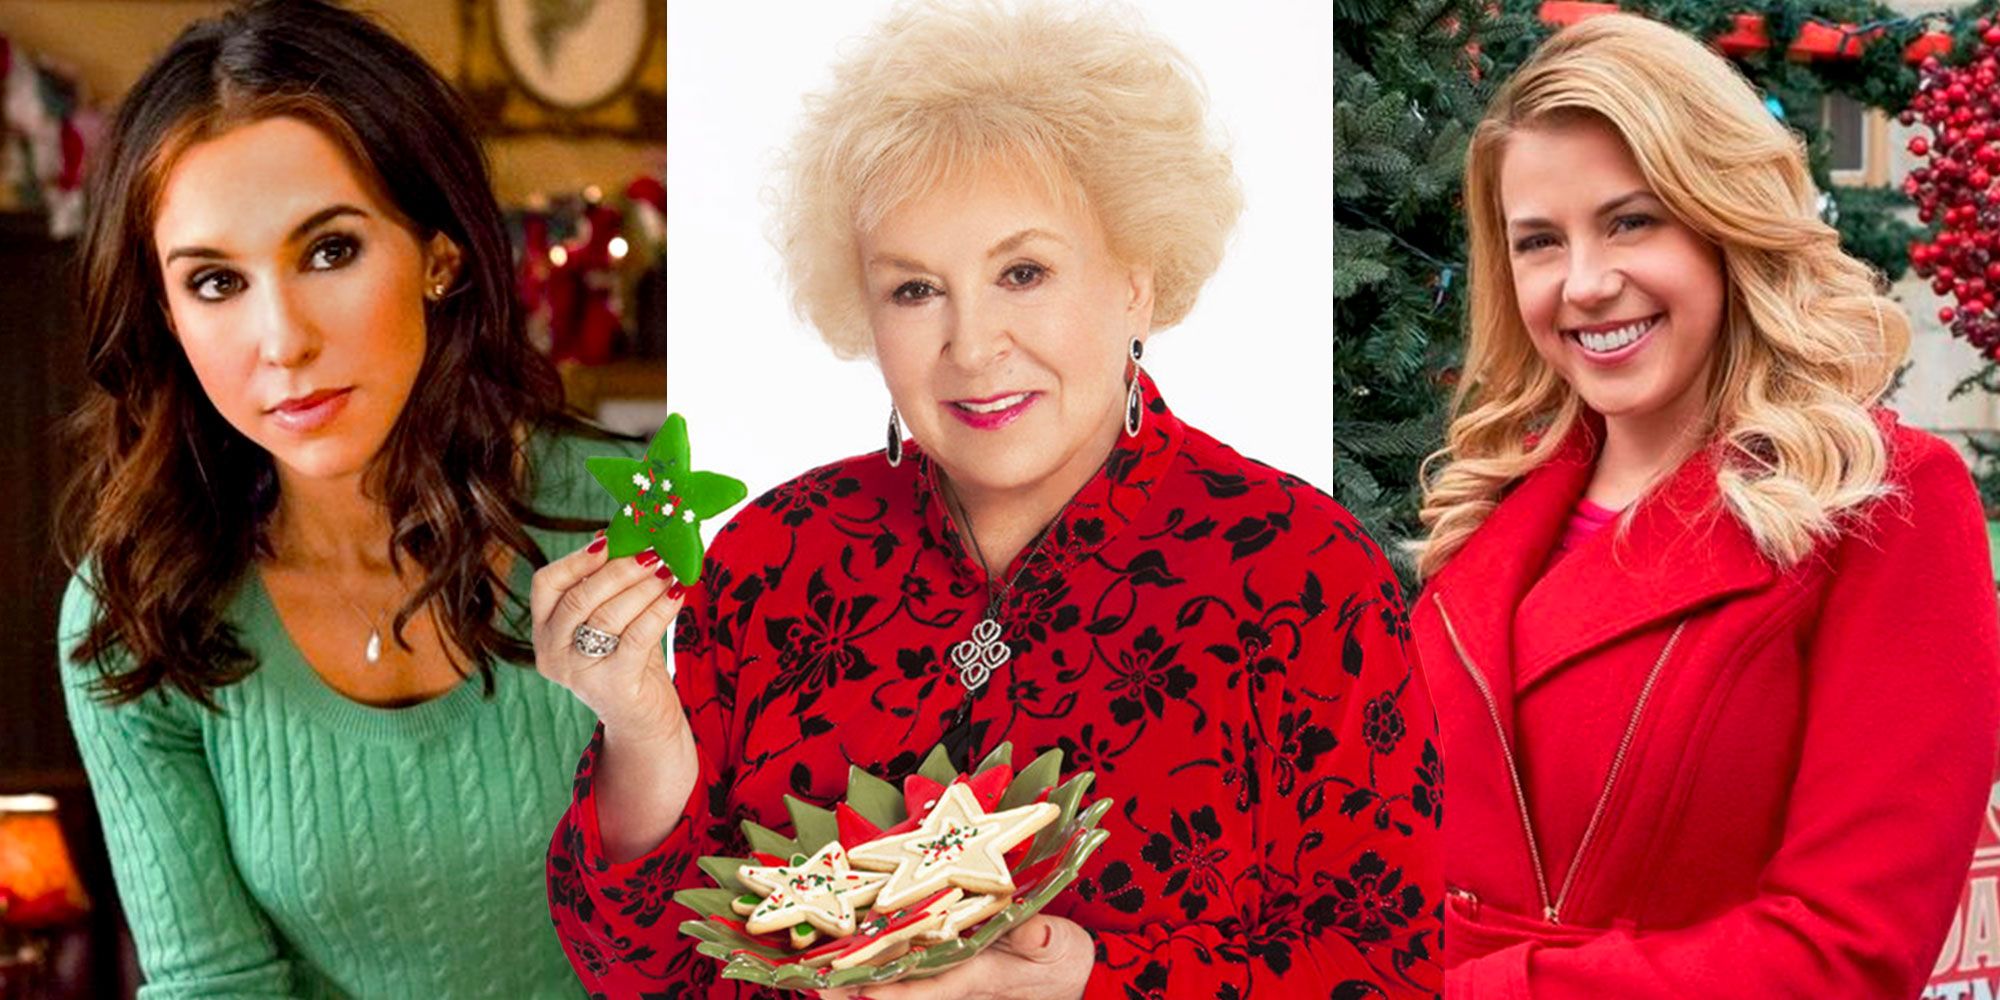 Split image of Hallmark actresses from Christmas movies